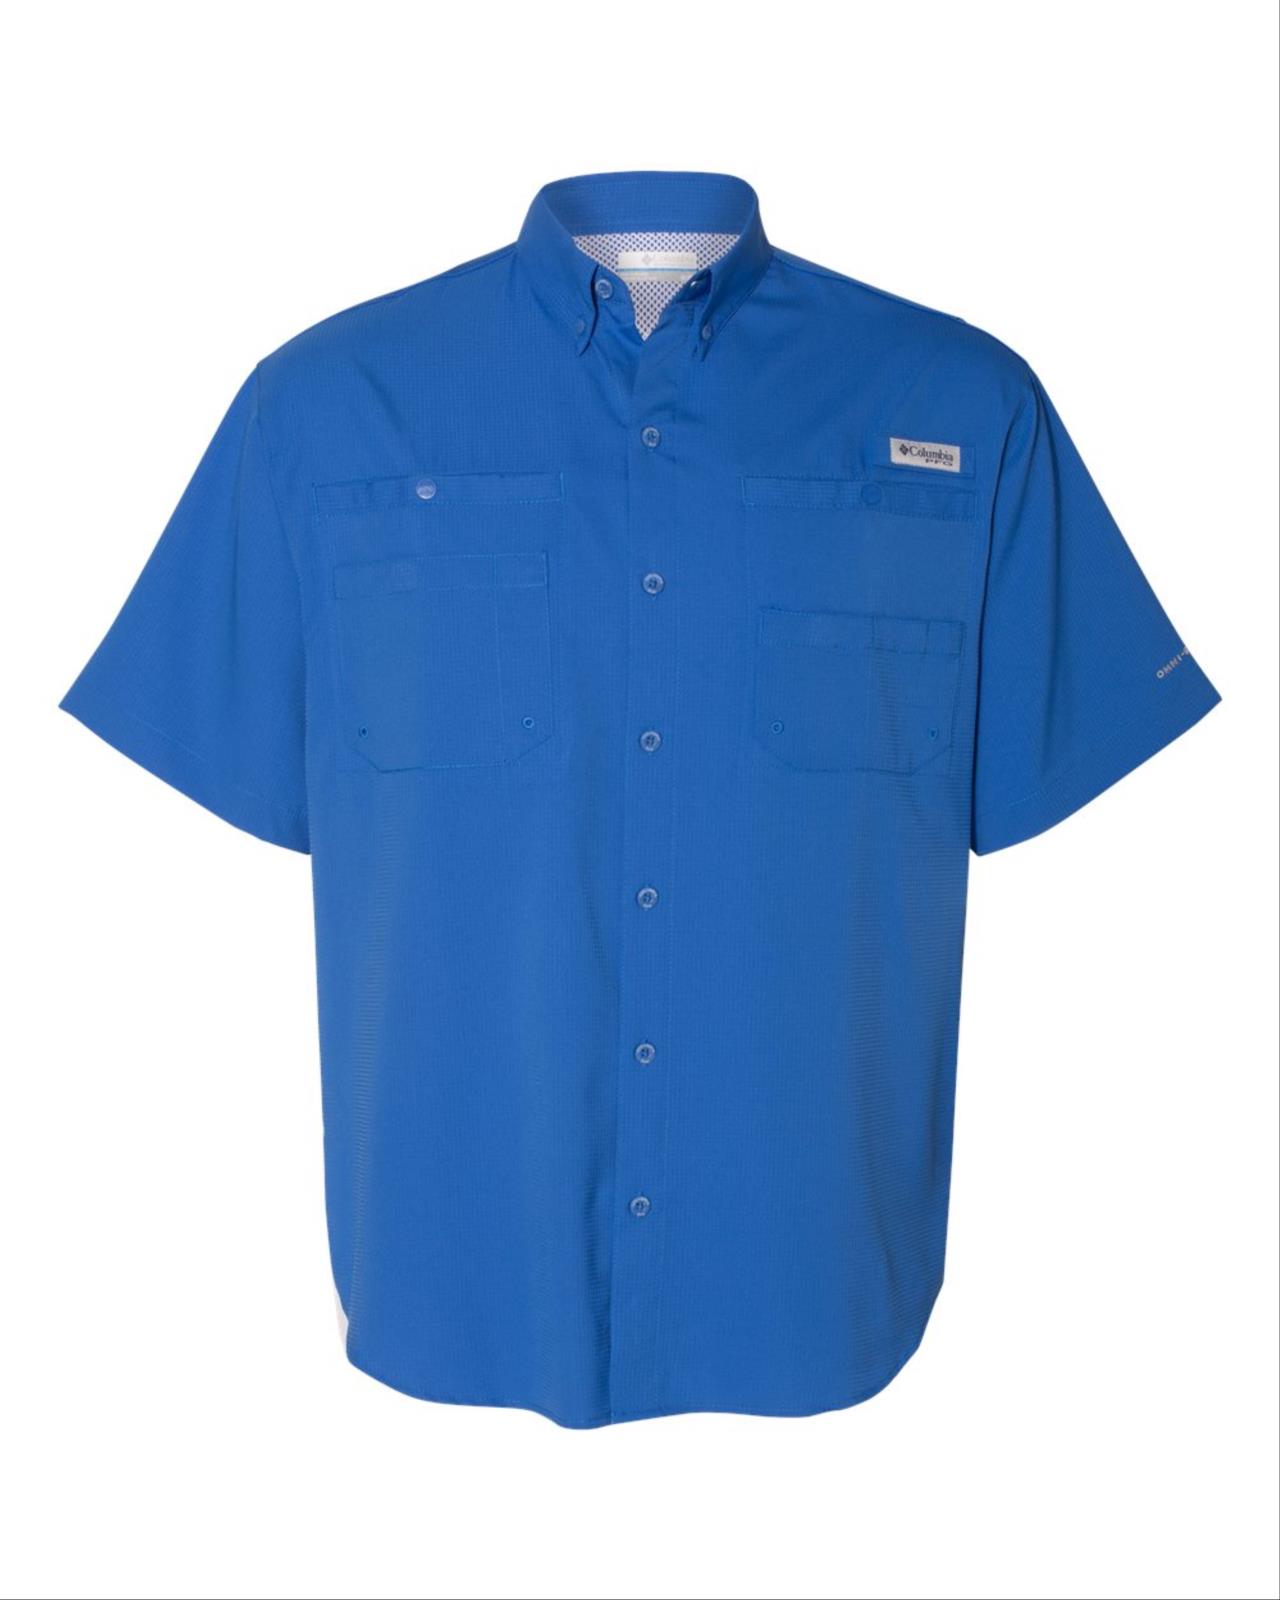 Safety Products Inc - Columbia Tamiami™ II, RipStop Shirts